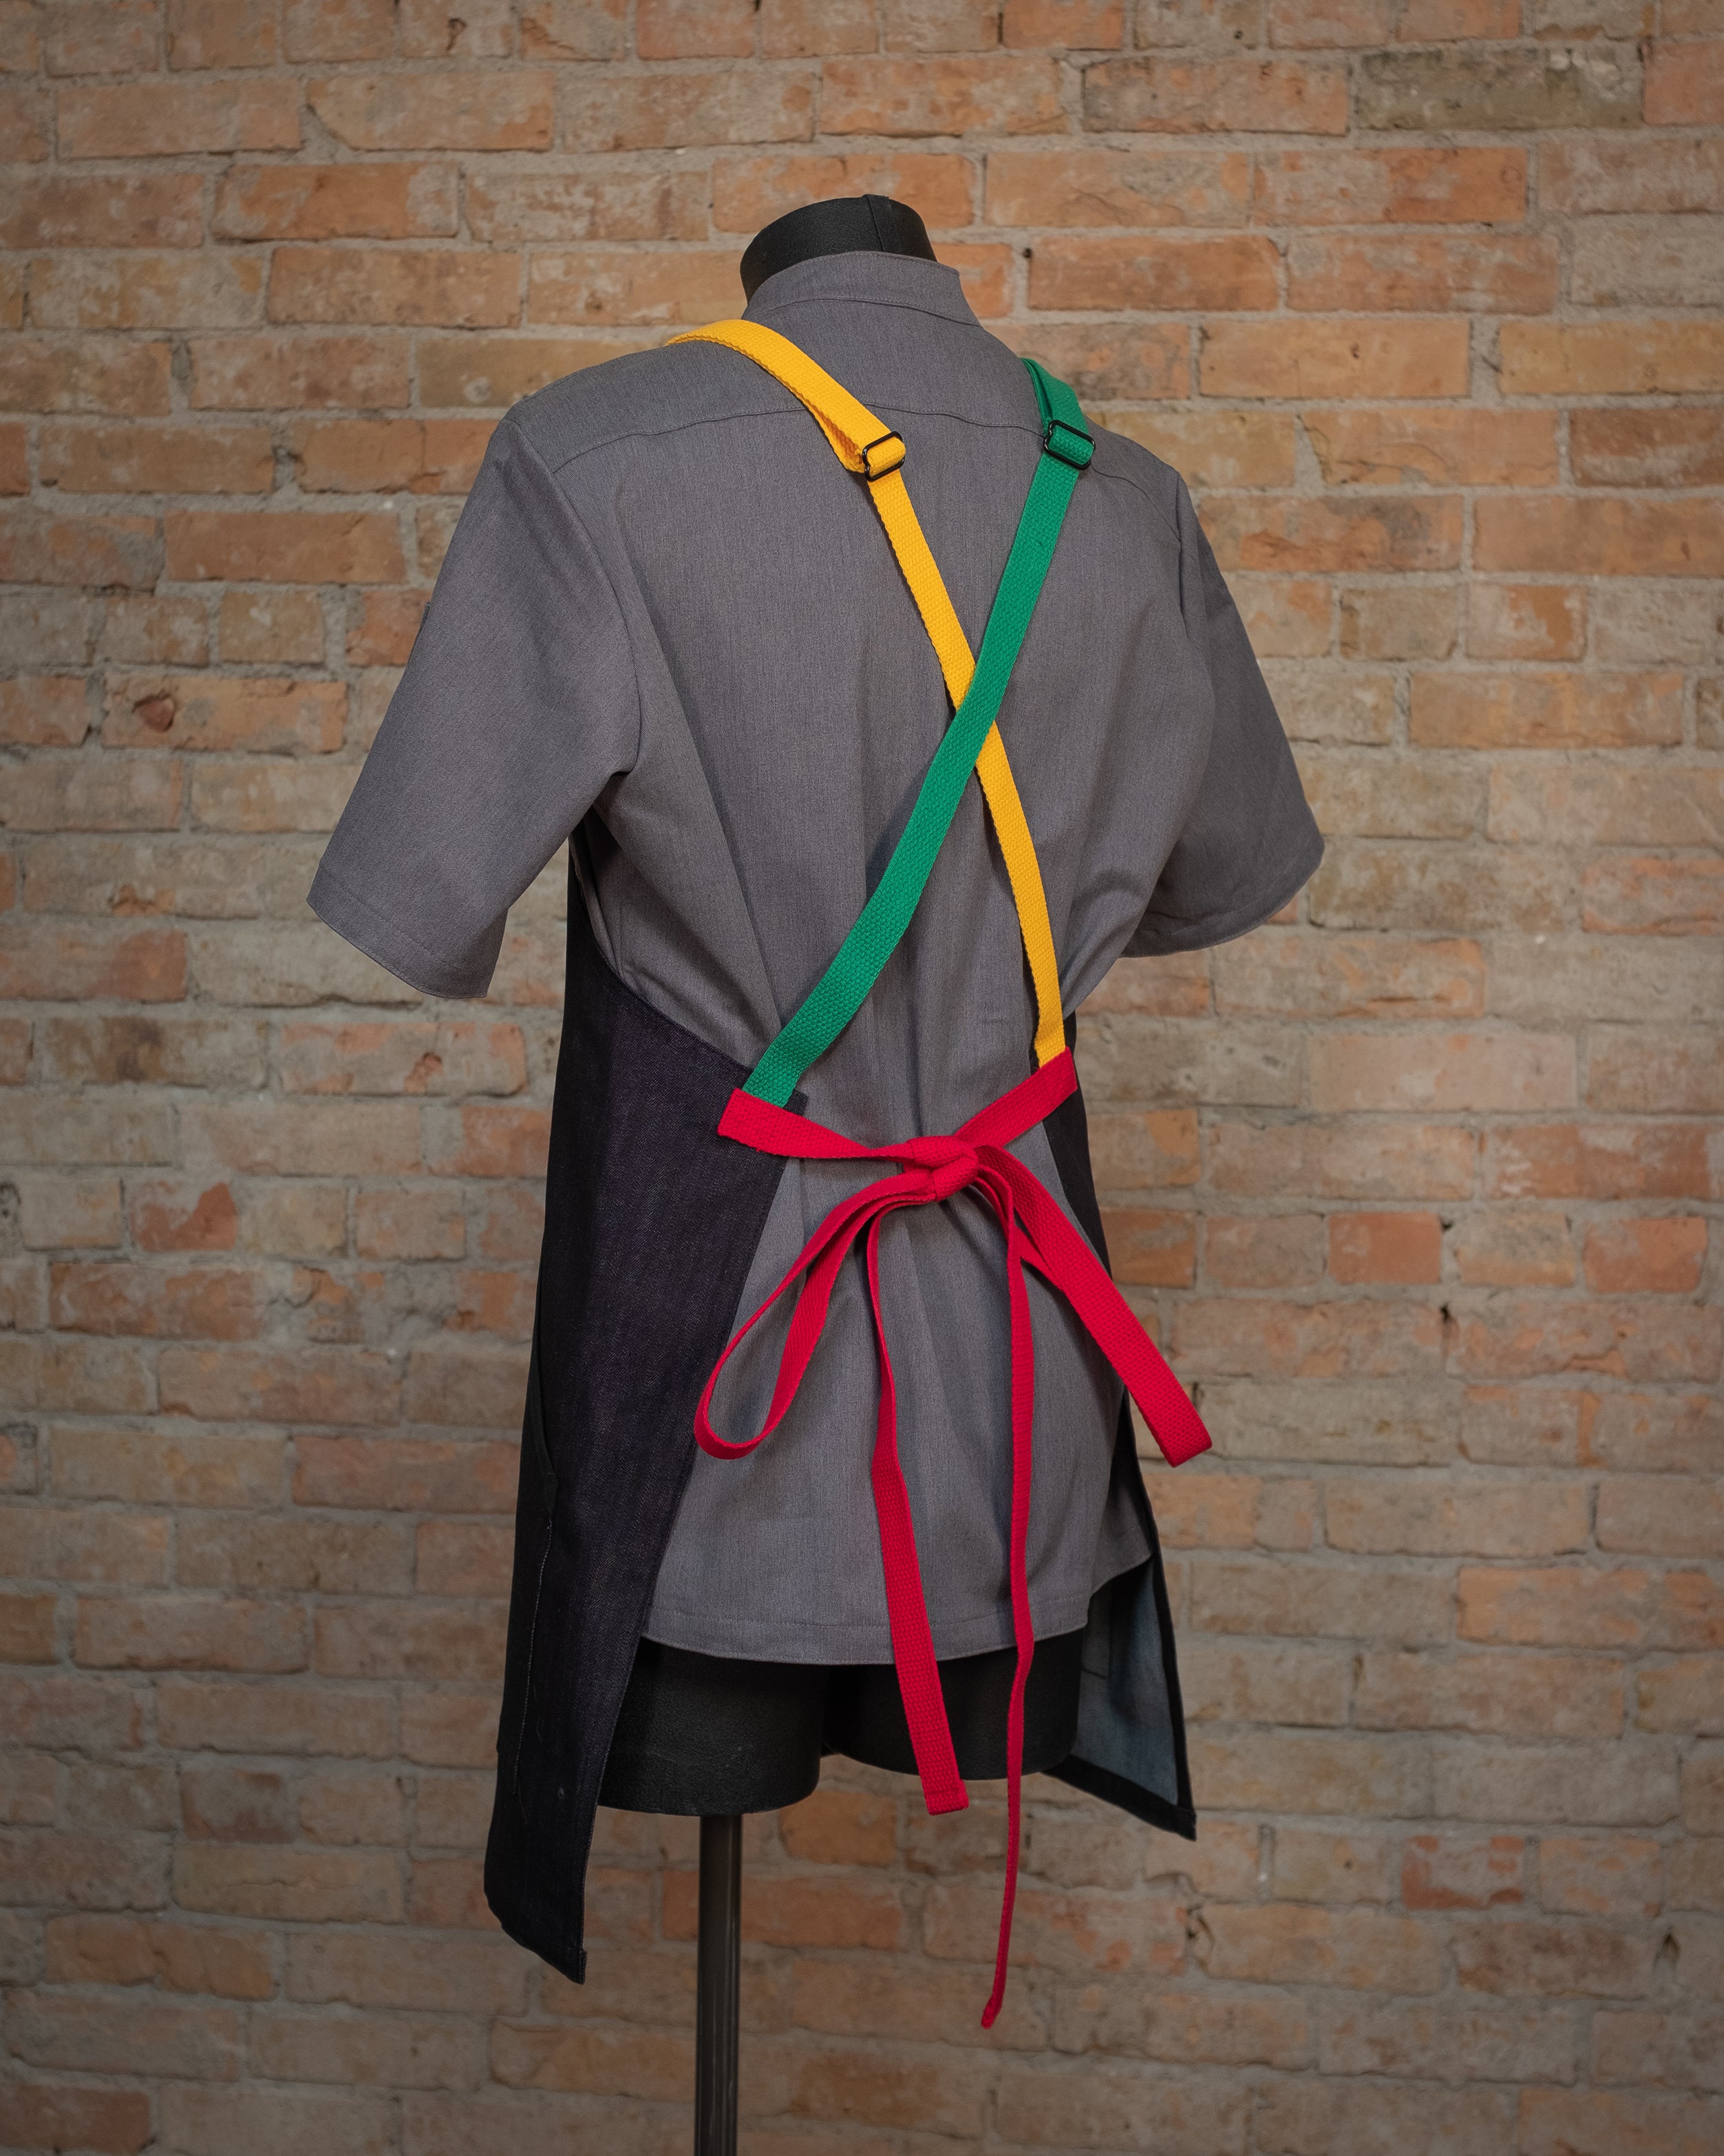 Denim crossback apron from Craftmade Aprons, Minnesota, displayed on a mannequin over a gray chef coat. The apron Marley is shown from the back, accentuating the red, green, and yellow trio crossback strapping.